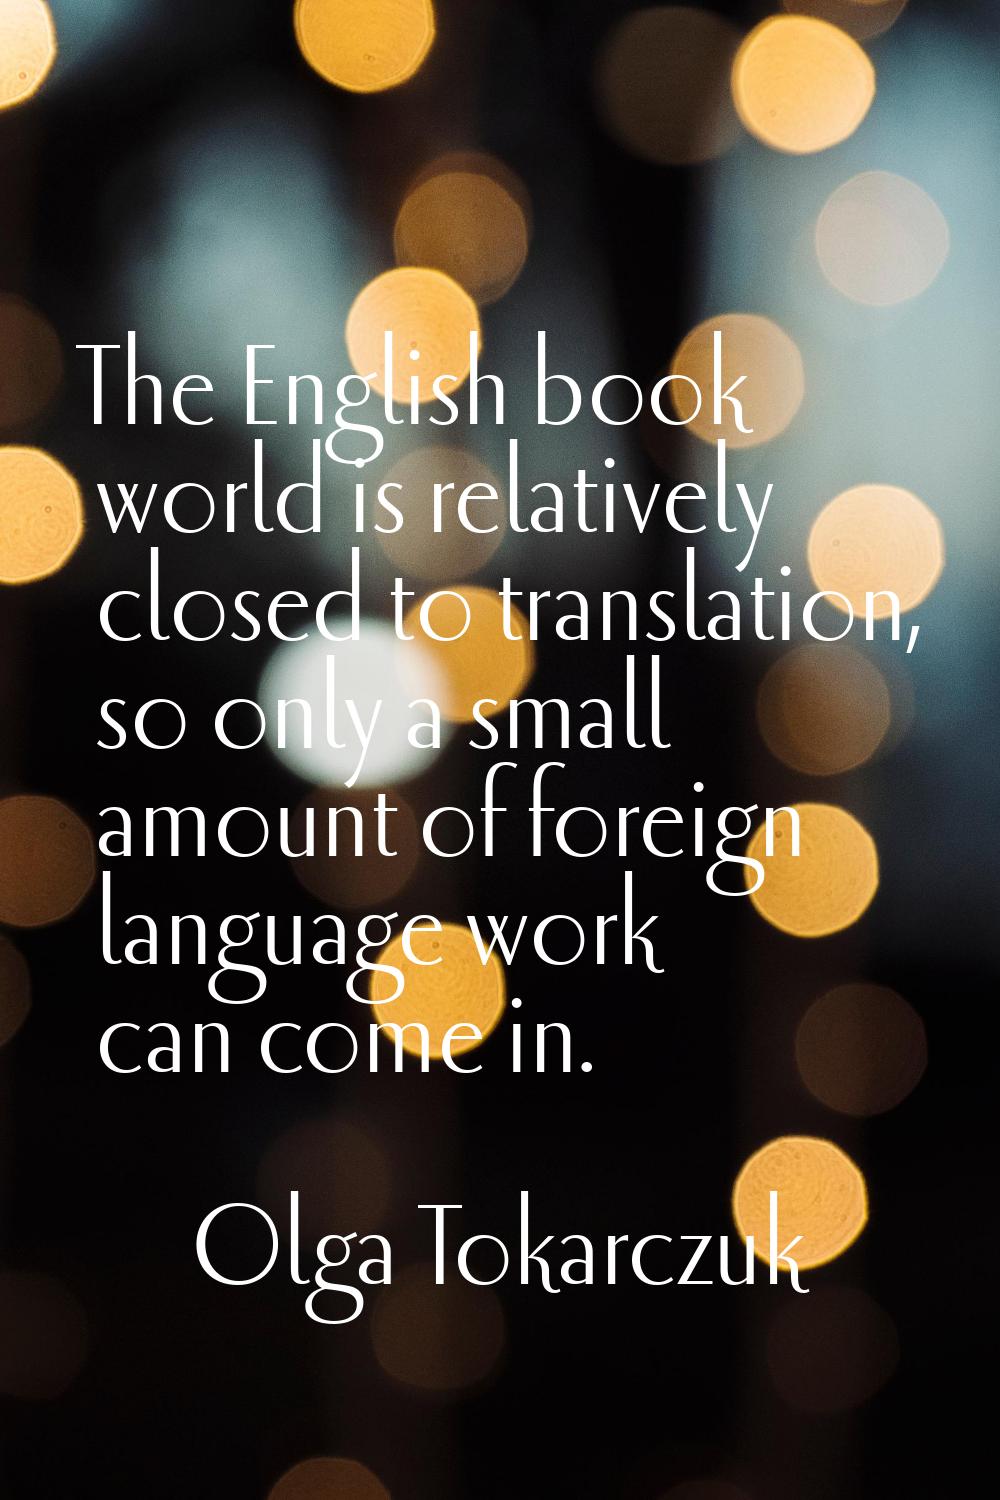 The English book world is relatively closed to translation, so only a small amount of foreign langu